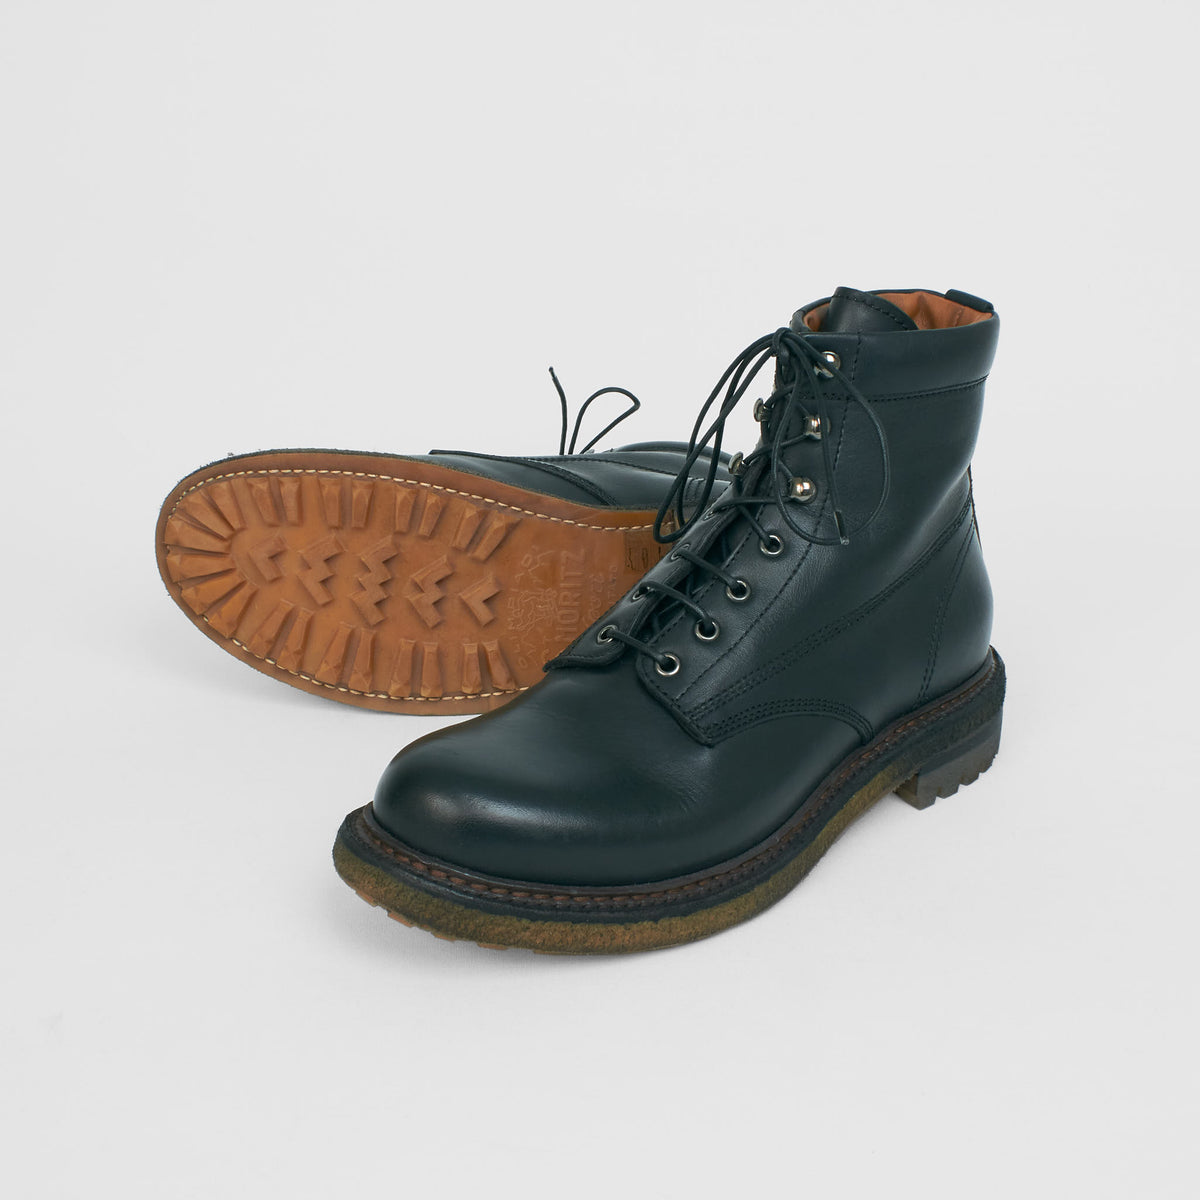 Silvano Sassetti Goodyear Welted Leather Lined Boot